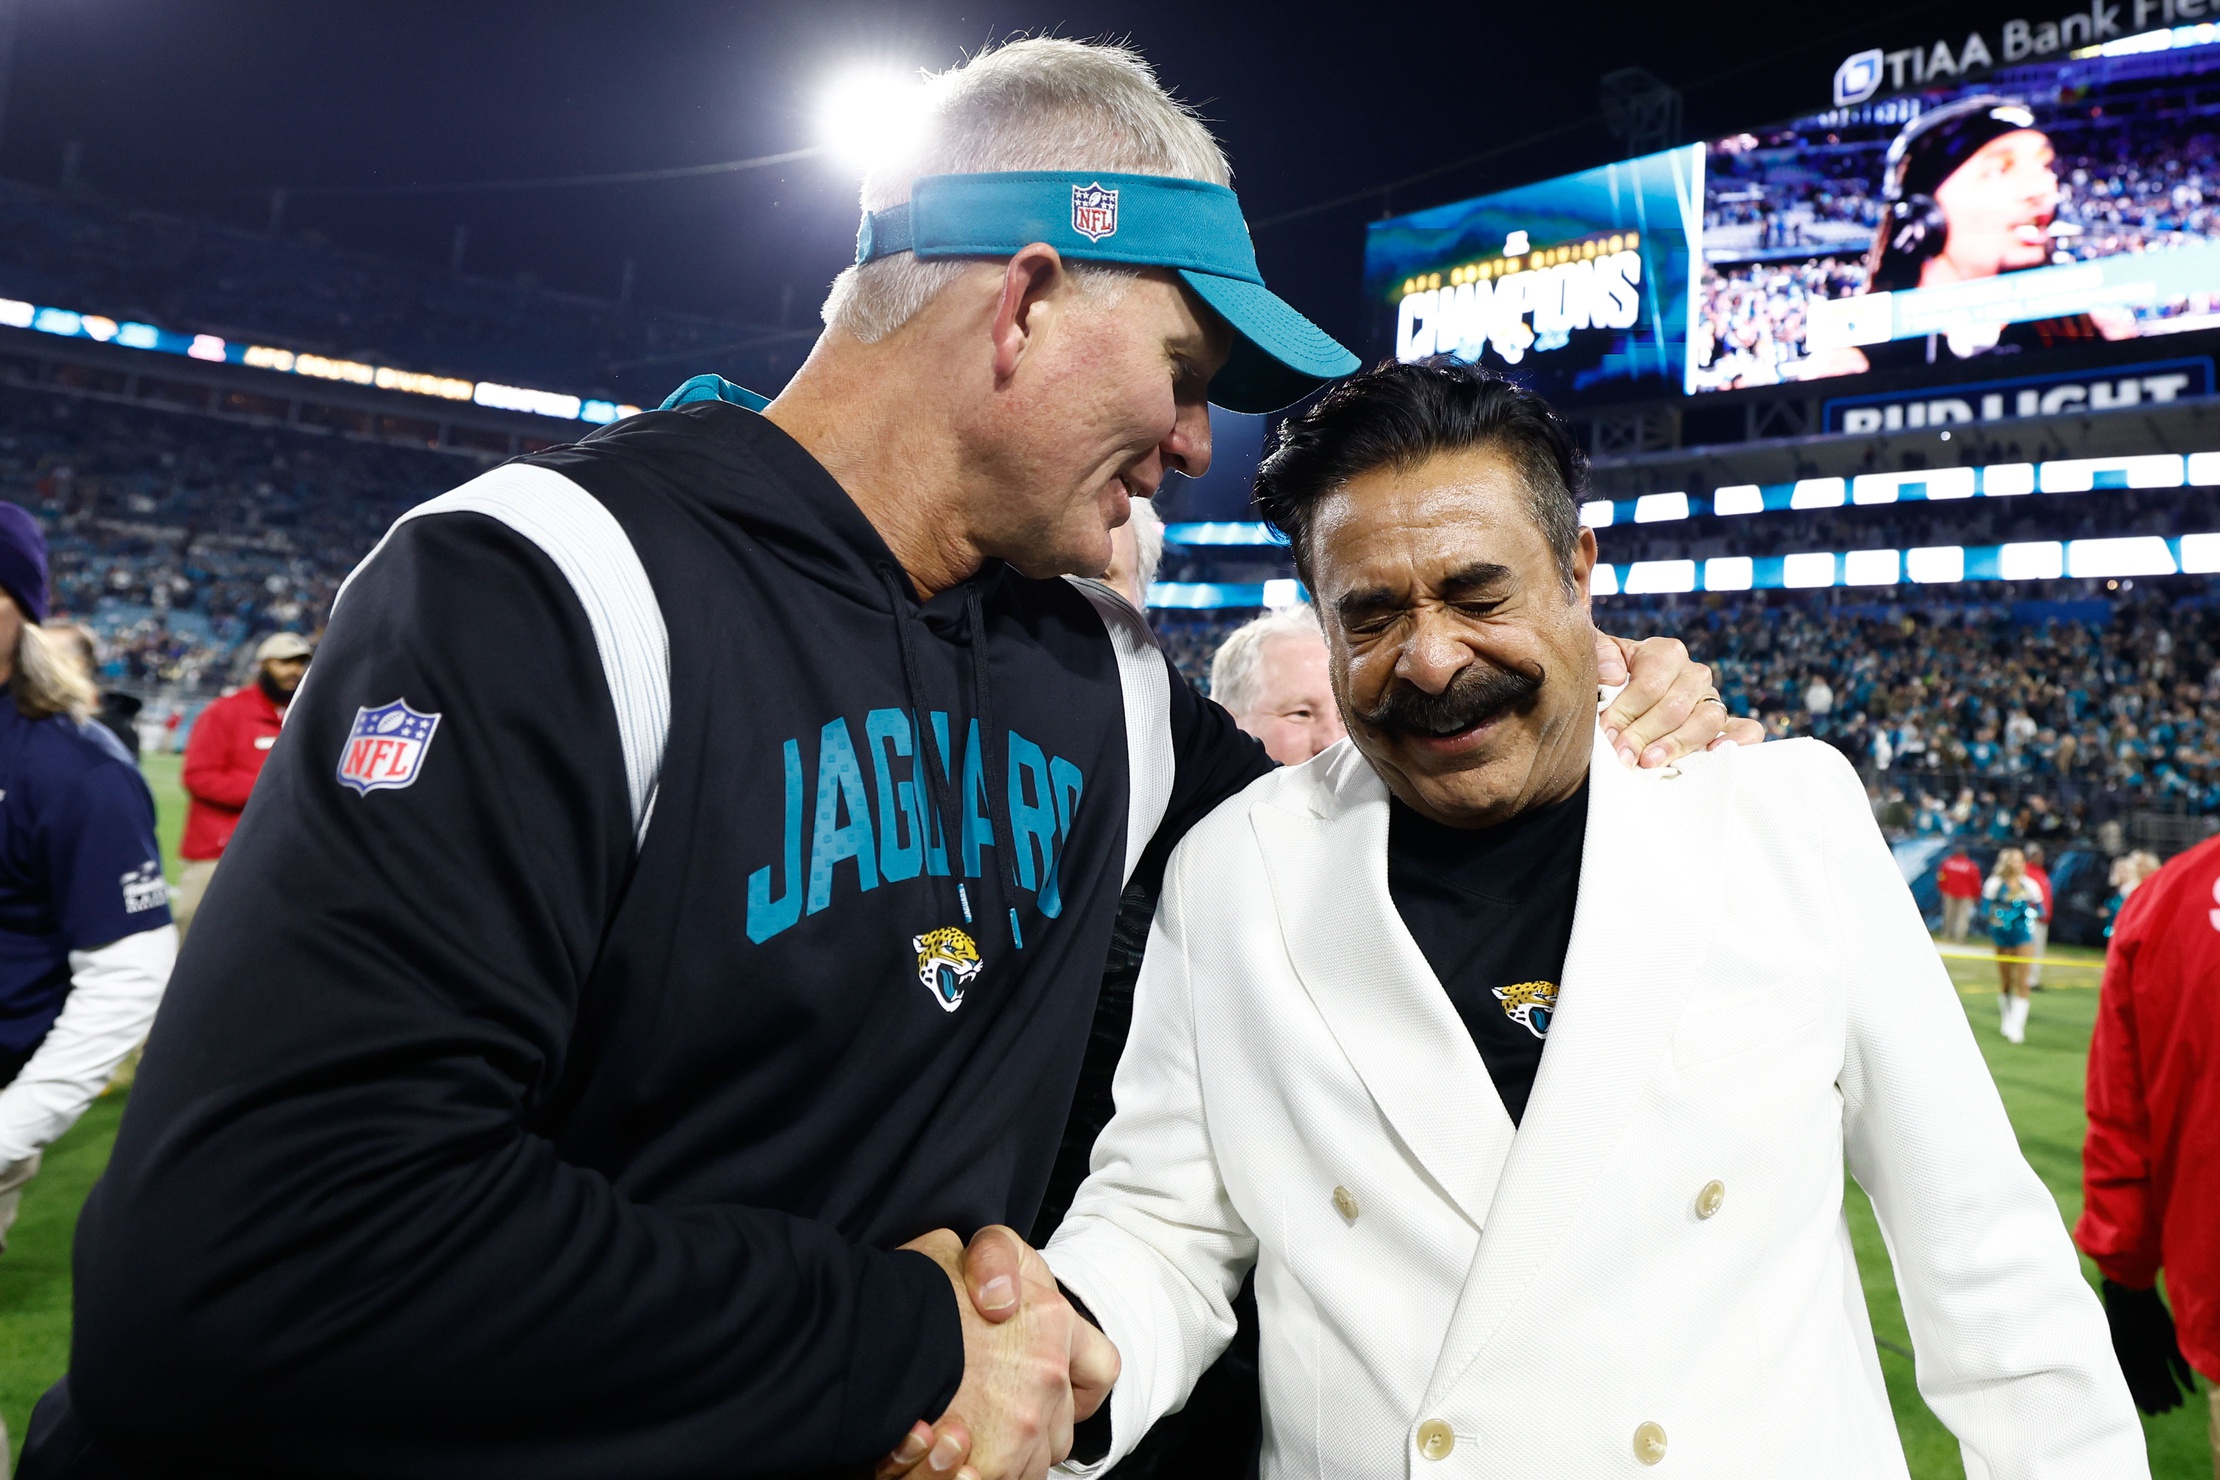 Who Is the Jacksonville Jaguars Owner? History of the Khan Family